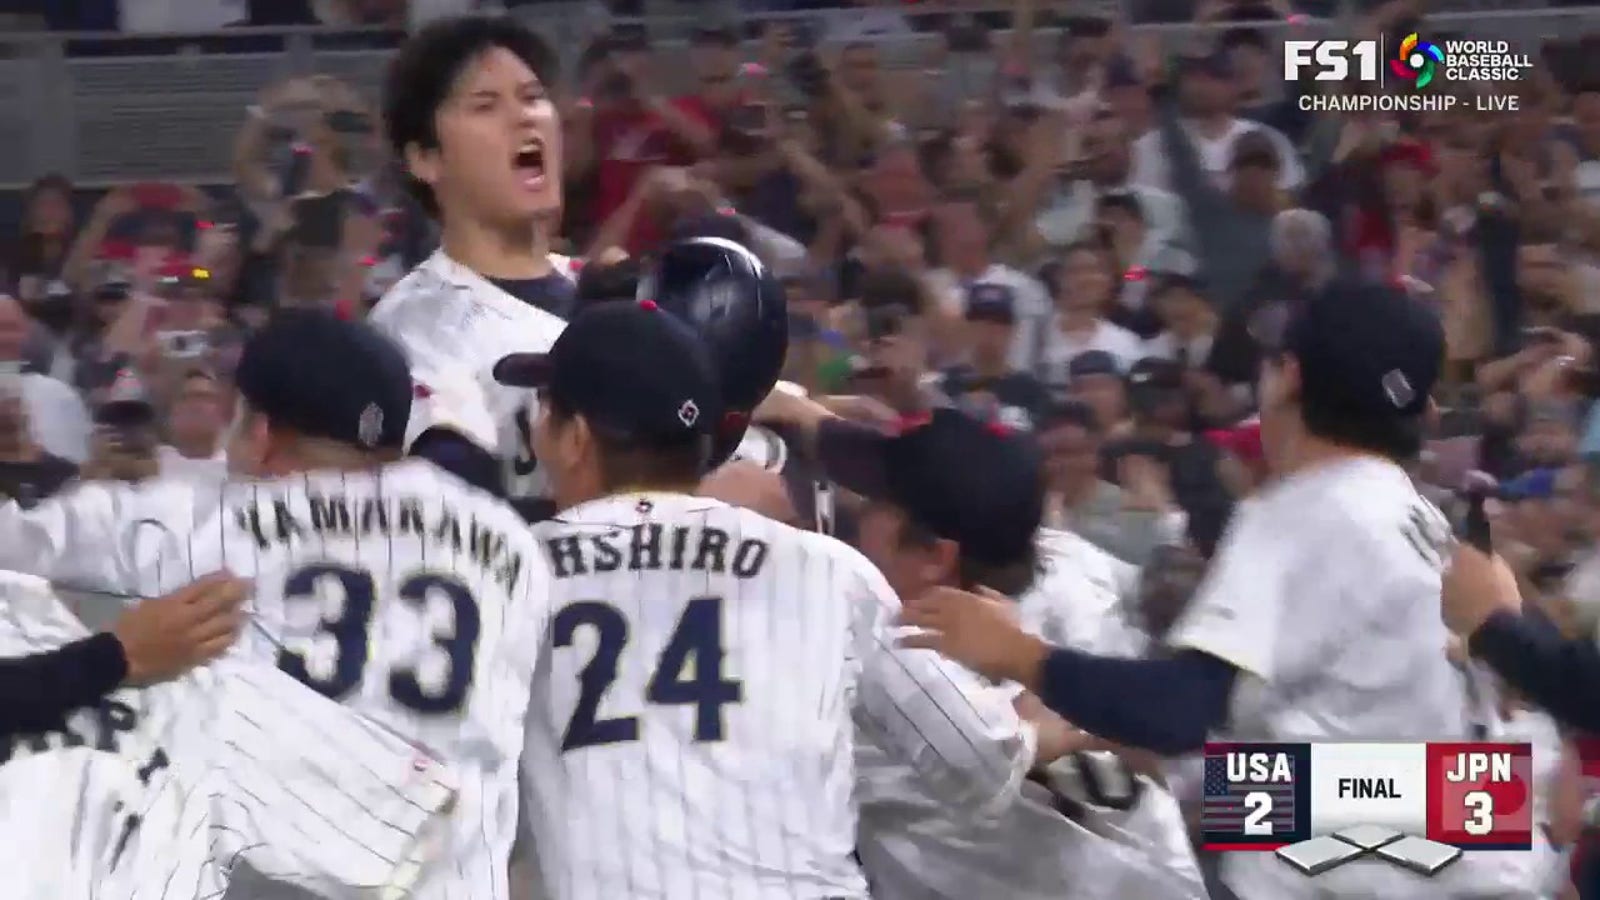 Beryl TV play-648debdab0016b9--28683327999 Japan edges USA in WBC final after Ohtani strikes out Trout Sports 